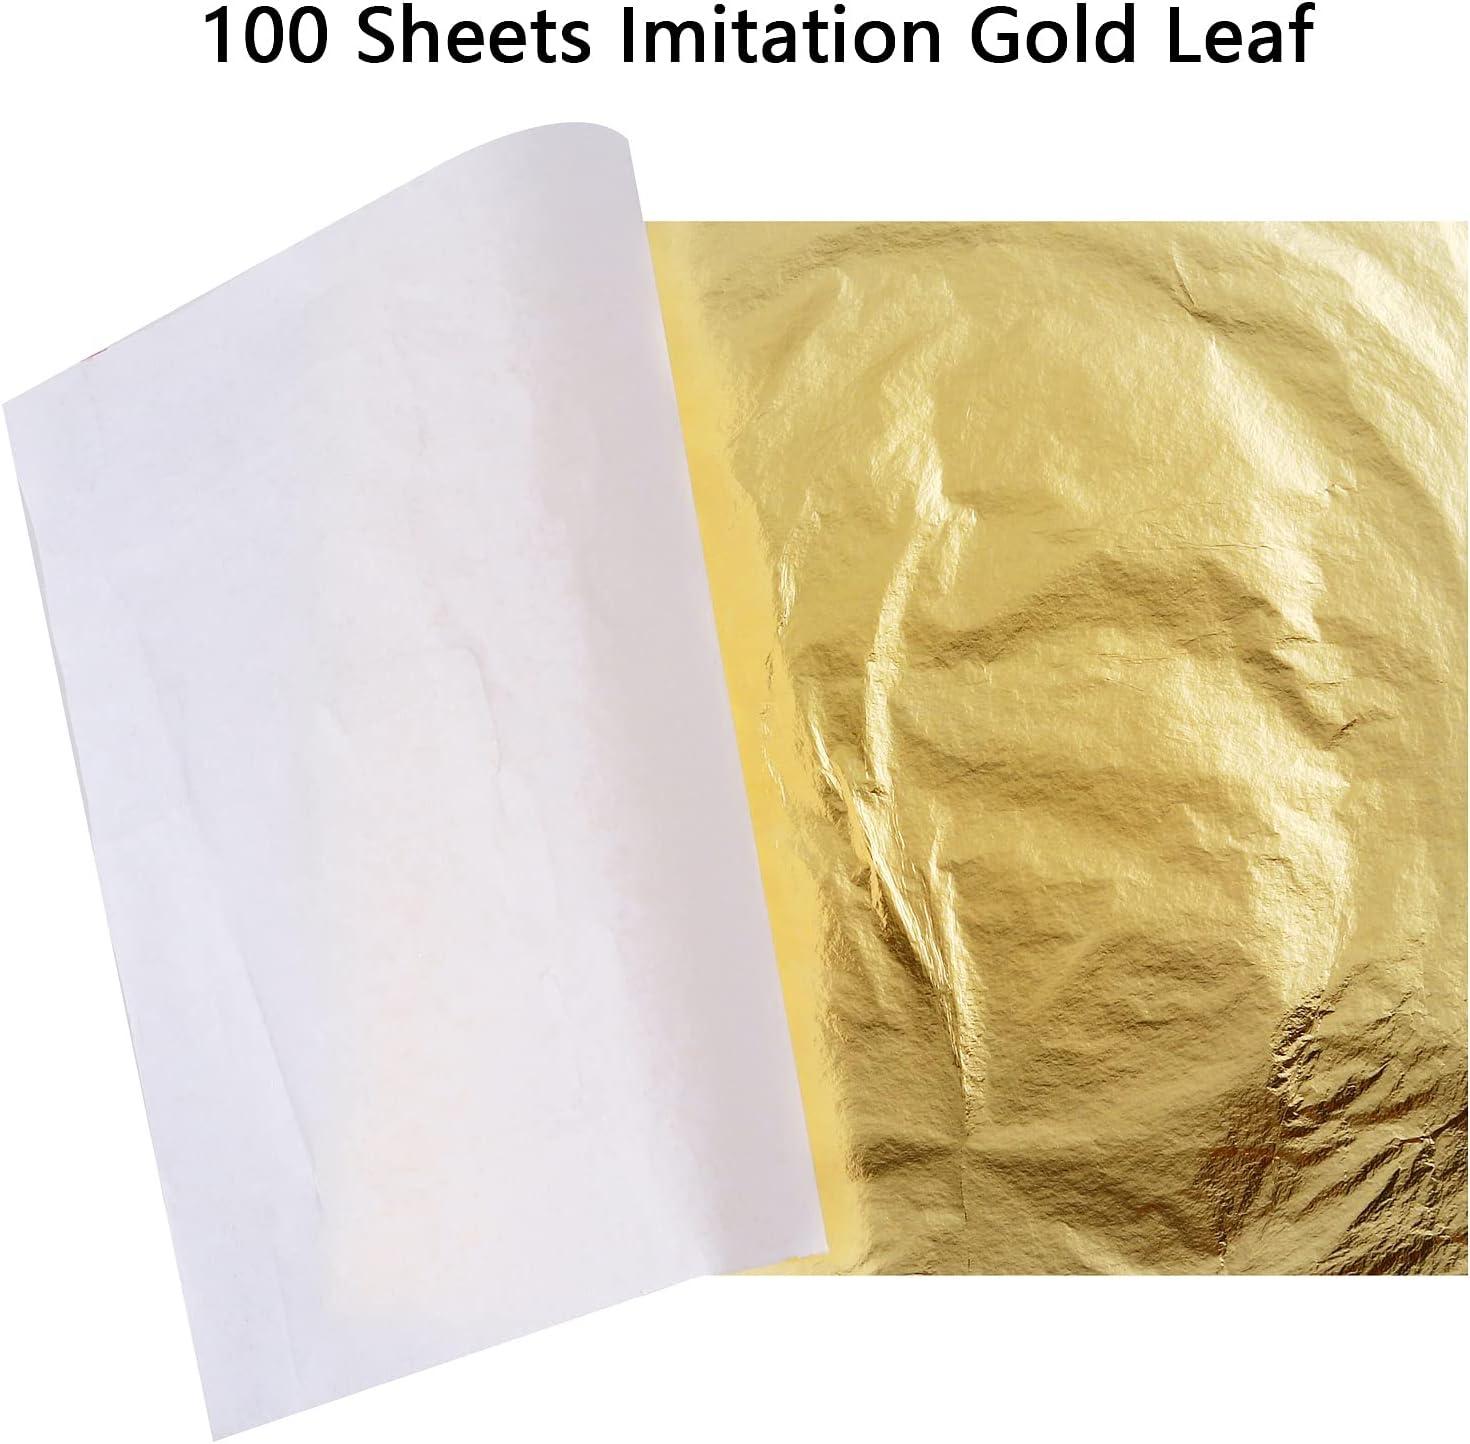  Bememo 100 Sheets Imitation Gold Leaf for Arts, Gilding  Crafting, Decoration, 5.5 by 5.5 Inches : Arts, Crafts & Sewing